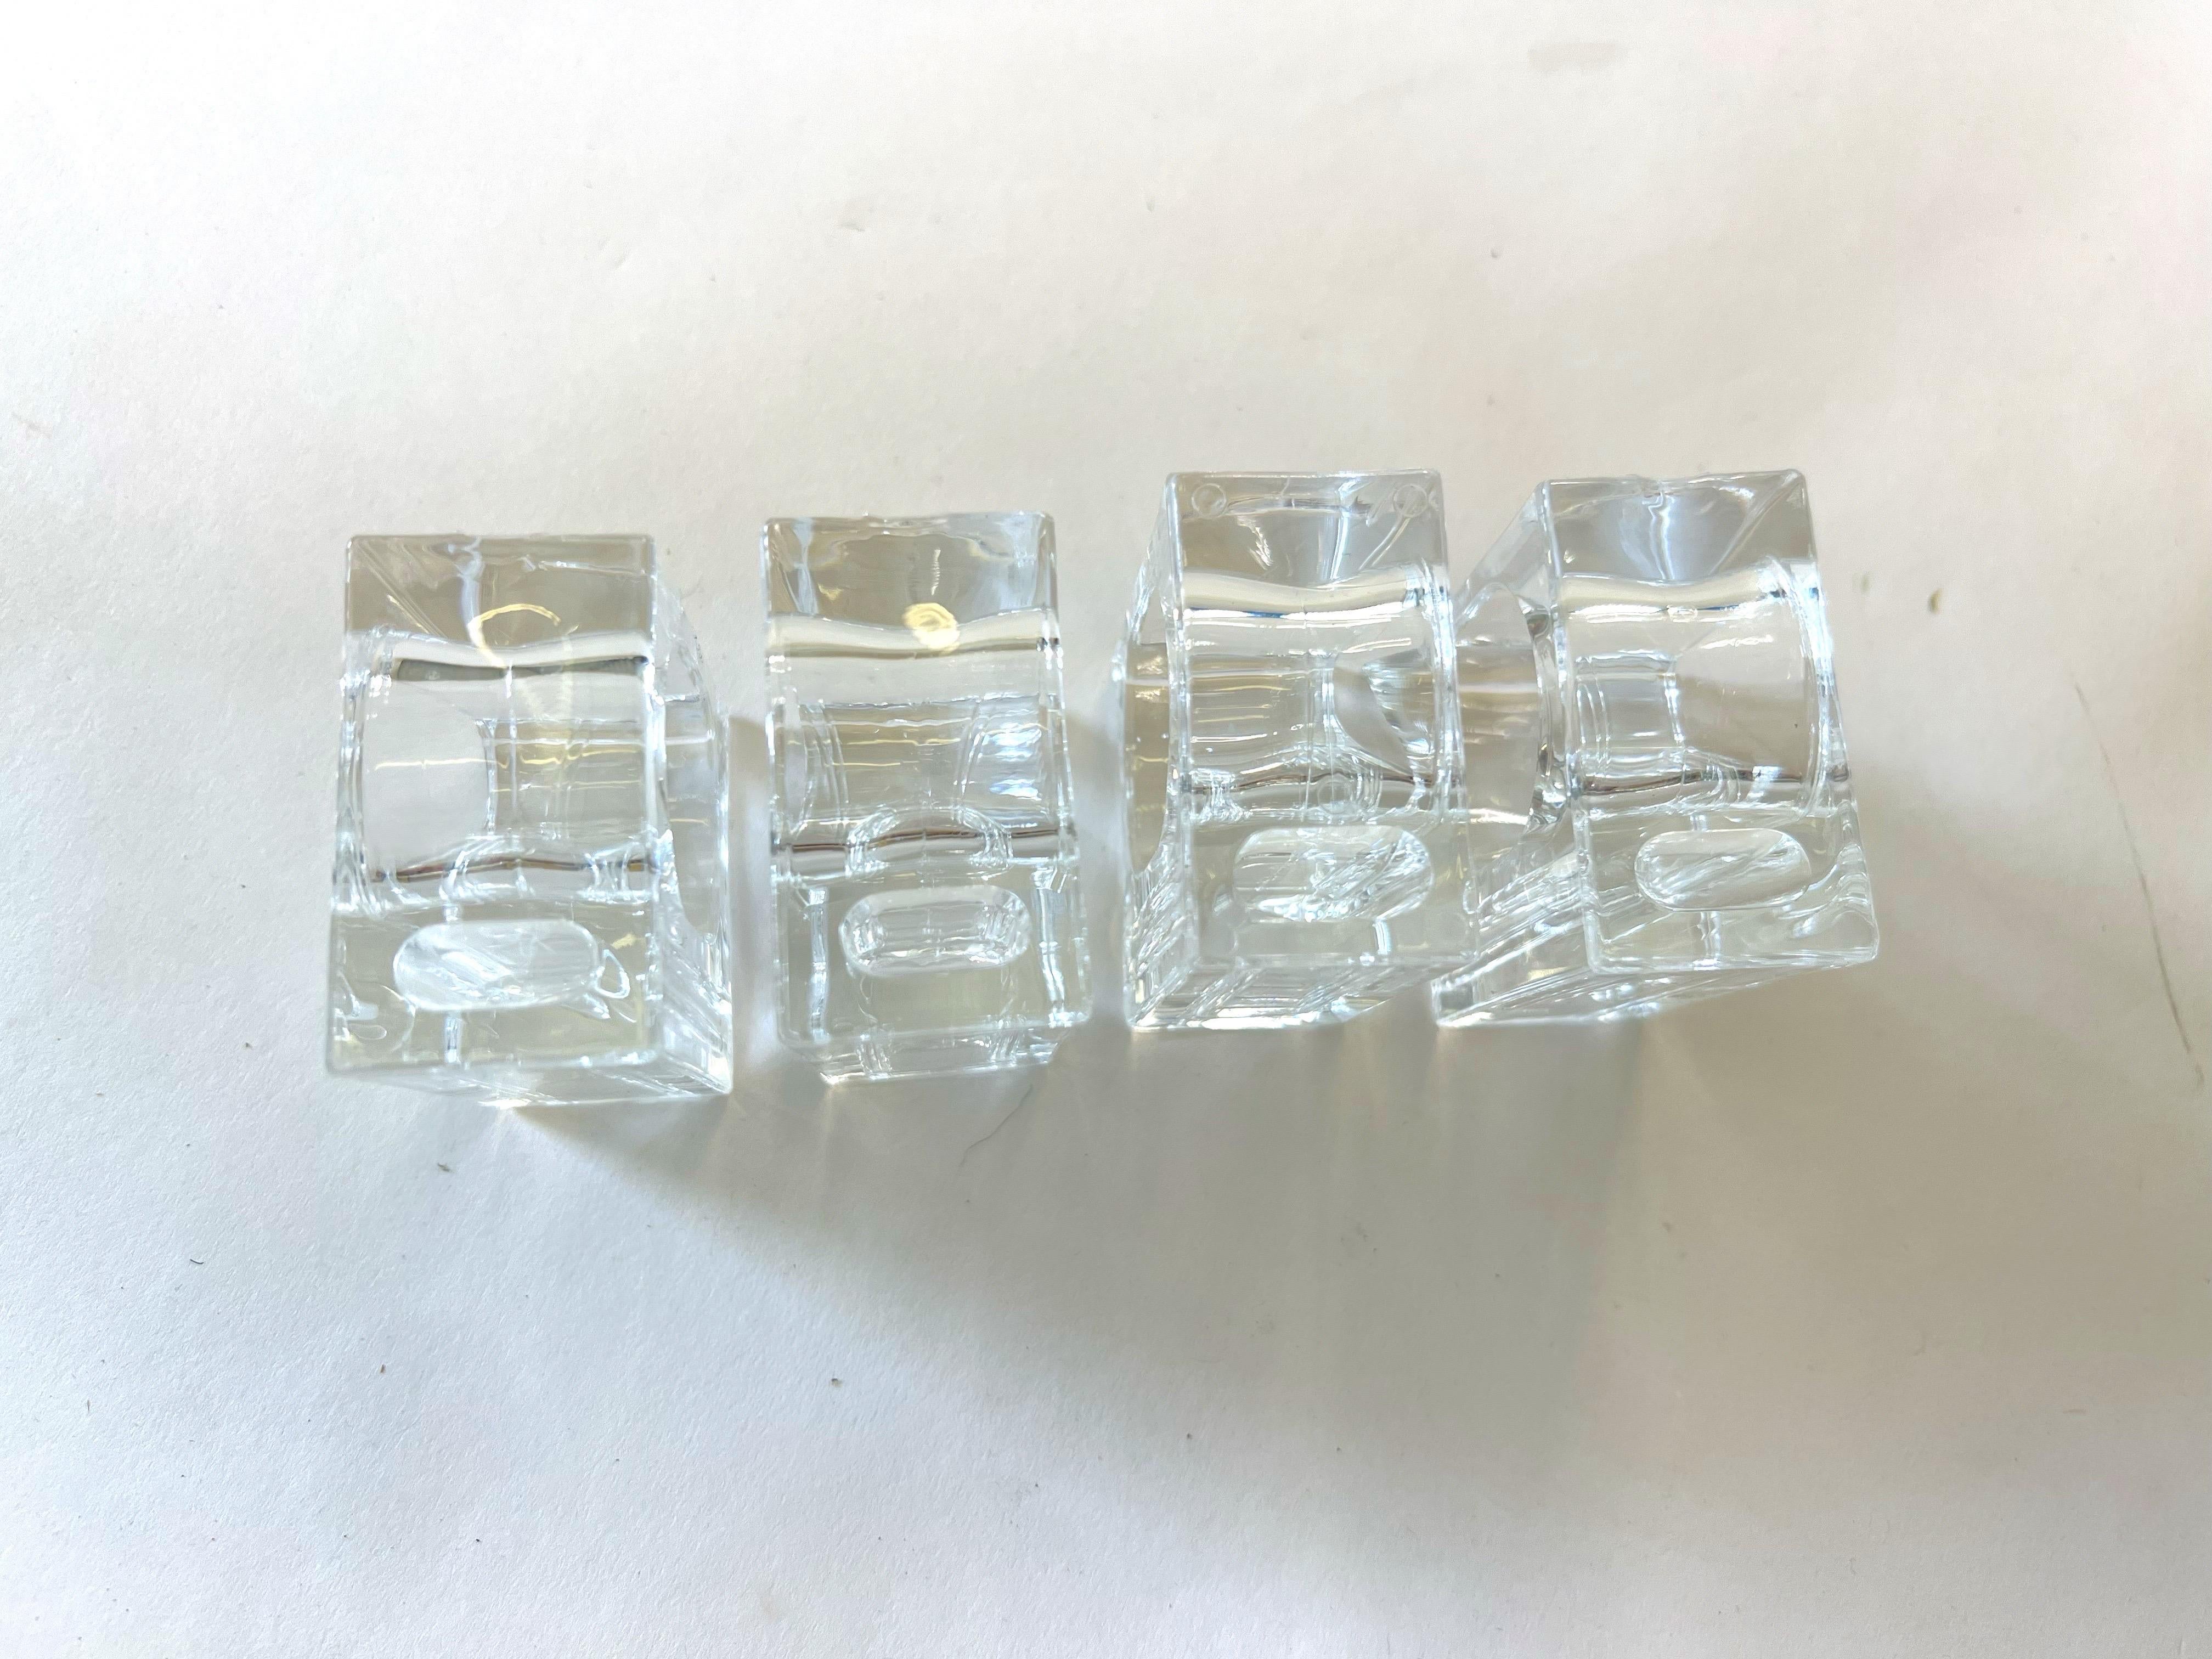 Mid-Century Modern Set of 4 Midcentury Polished Lucite Napkin Rings Holders, Usa, Circa 1960s For Sale